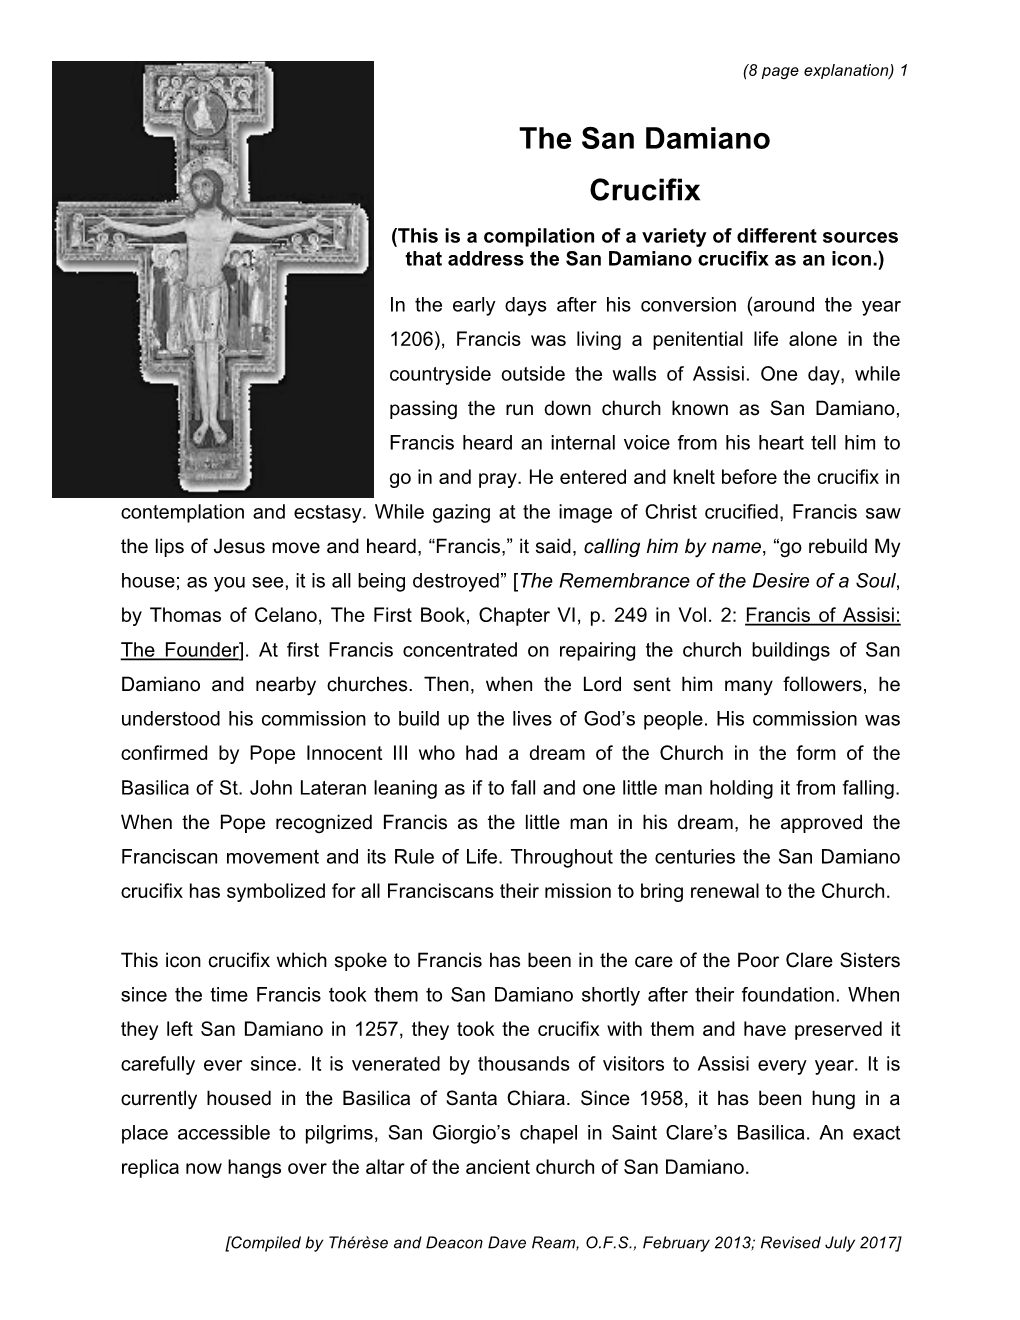 The San Damiano Crucifix (8 Page Explanation)